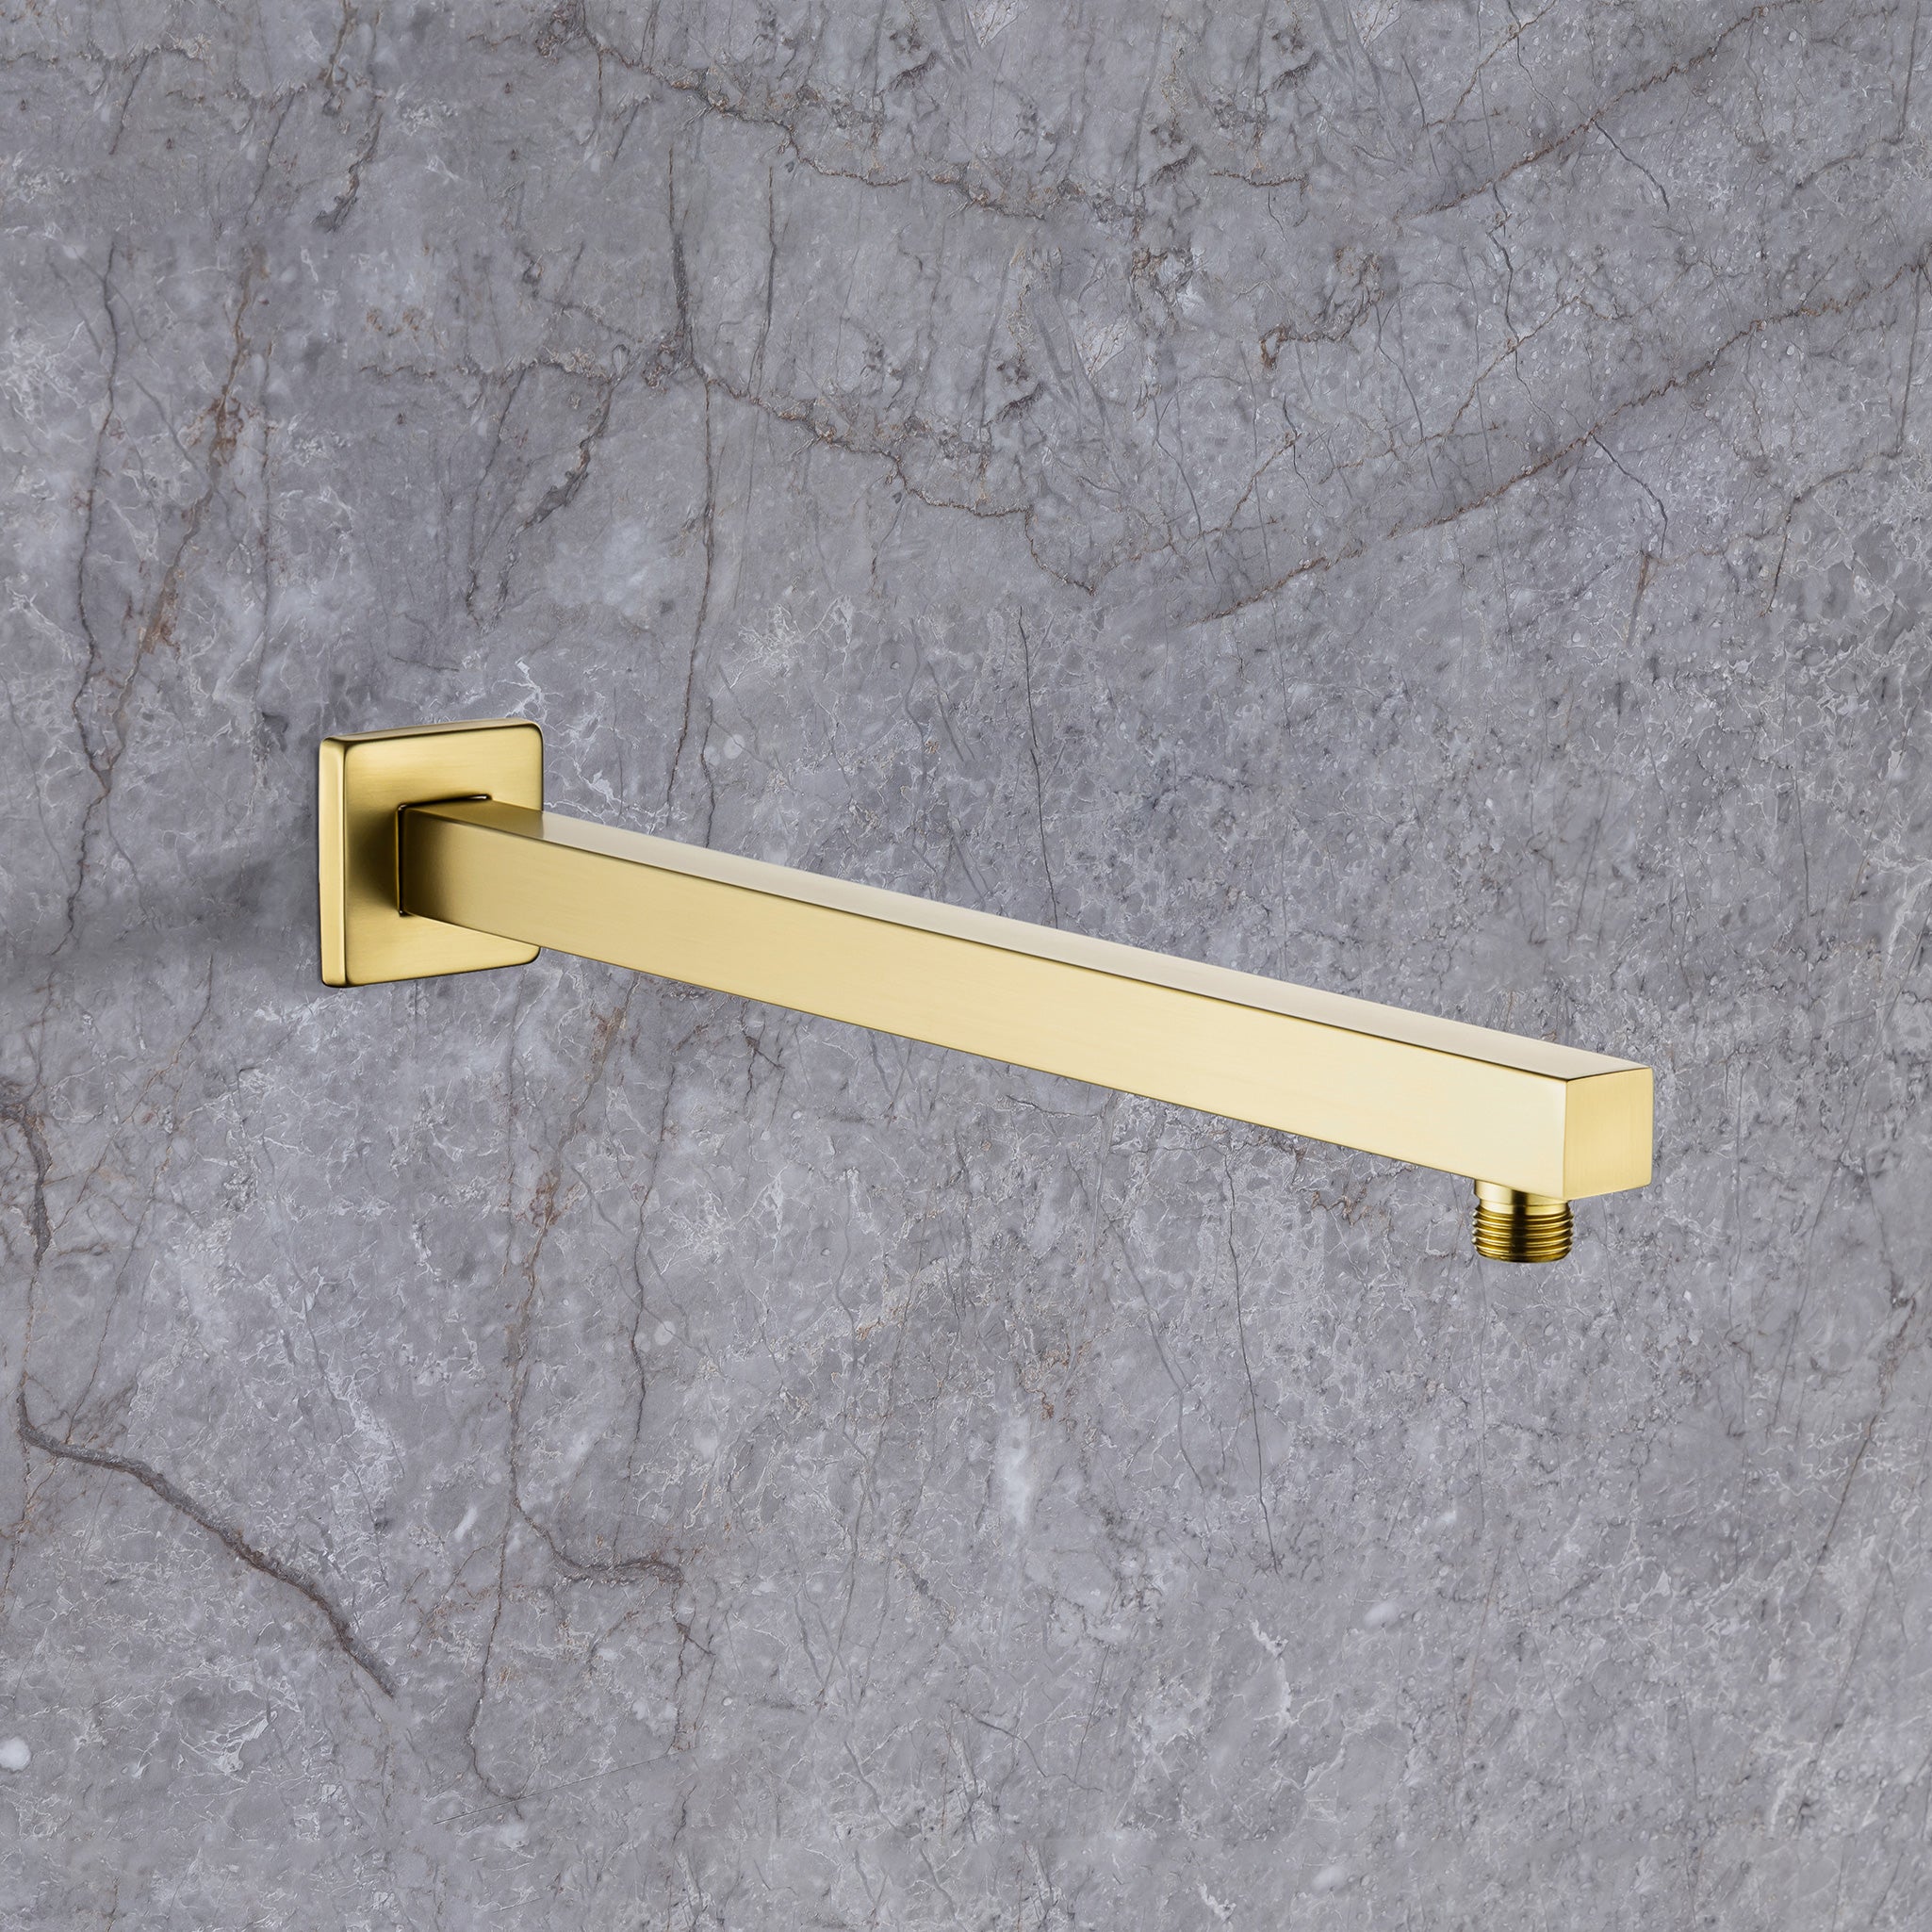 16 Inch Wall Mounted Shower Arm With Flange L1-16